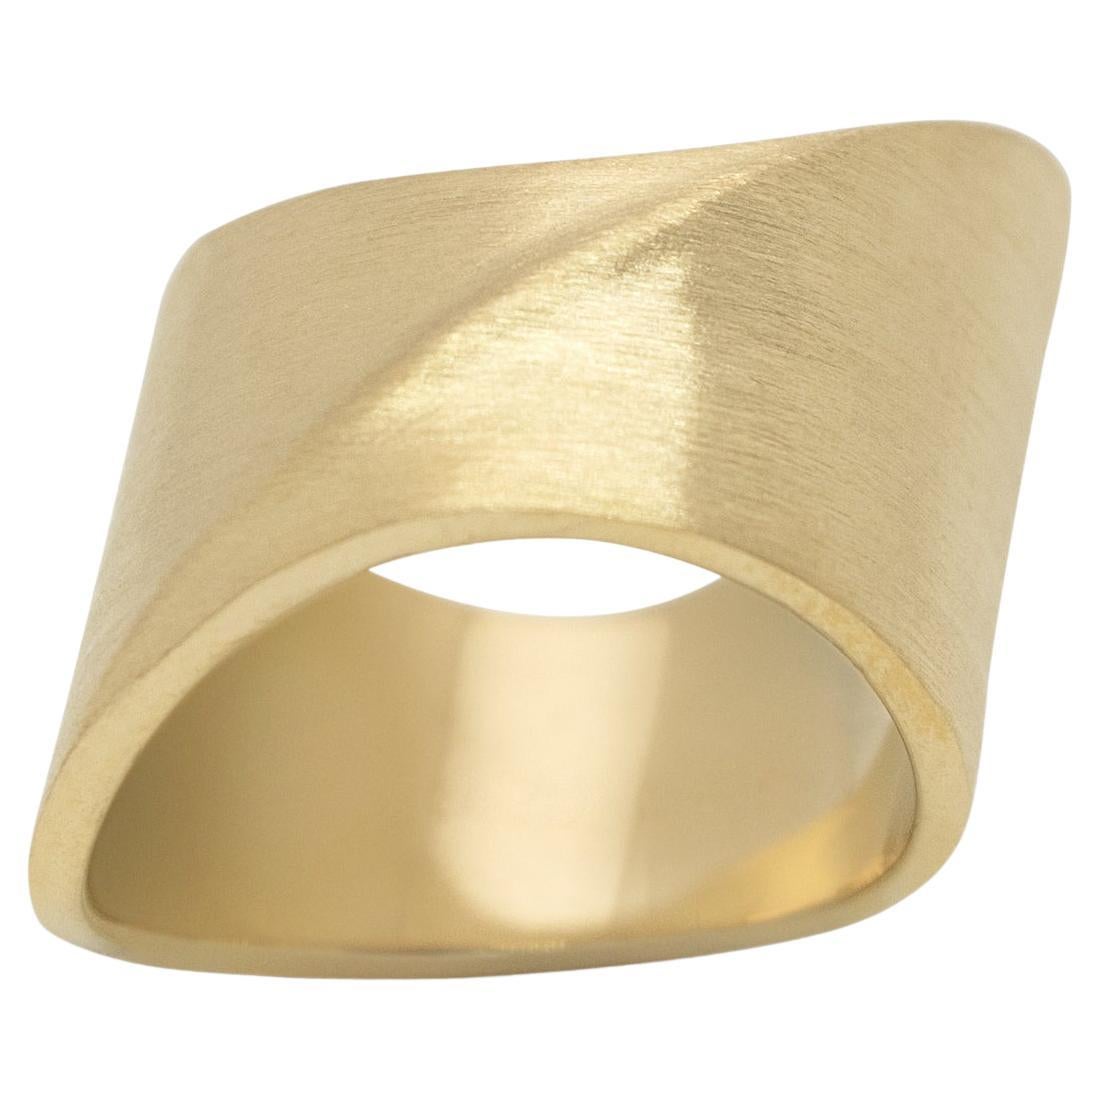 Band Ring in Textured Gold Vermeil